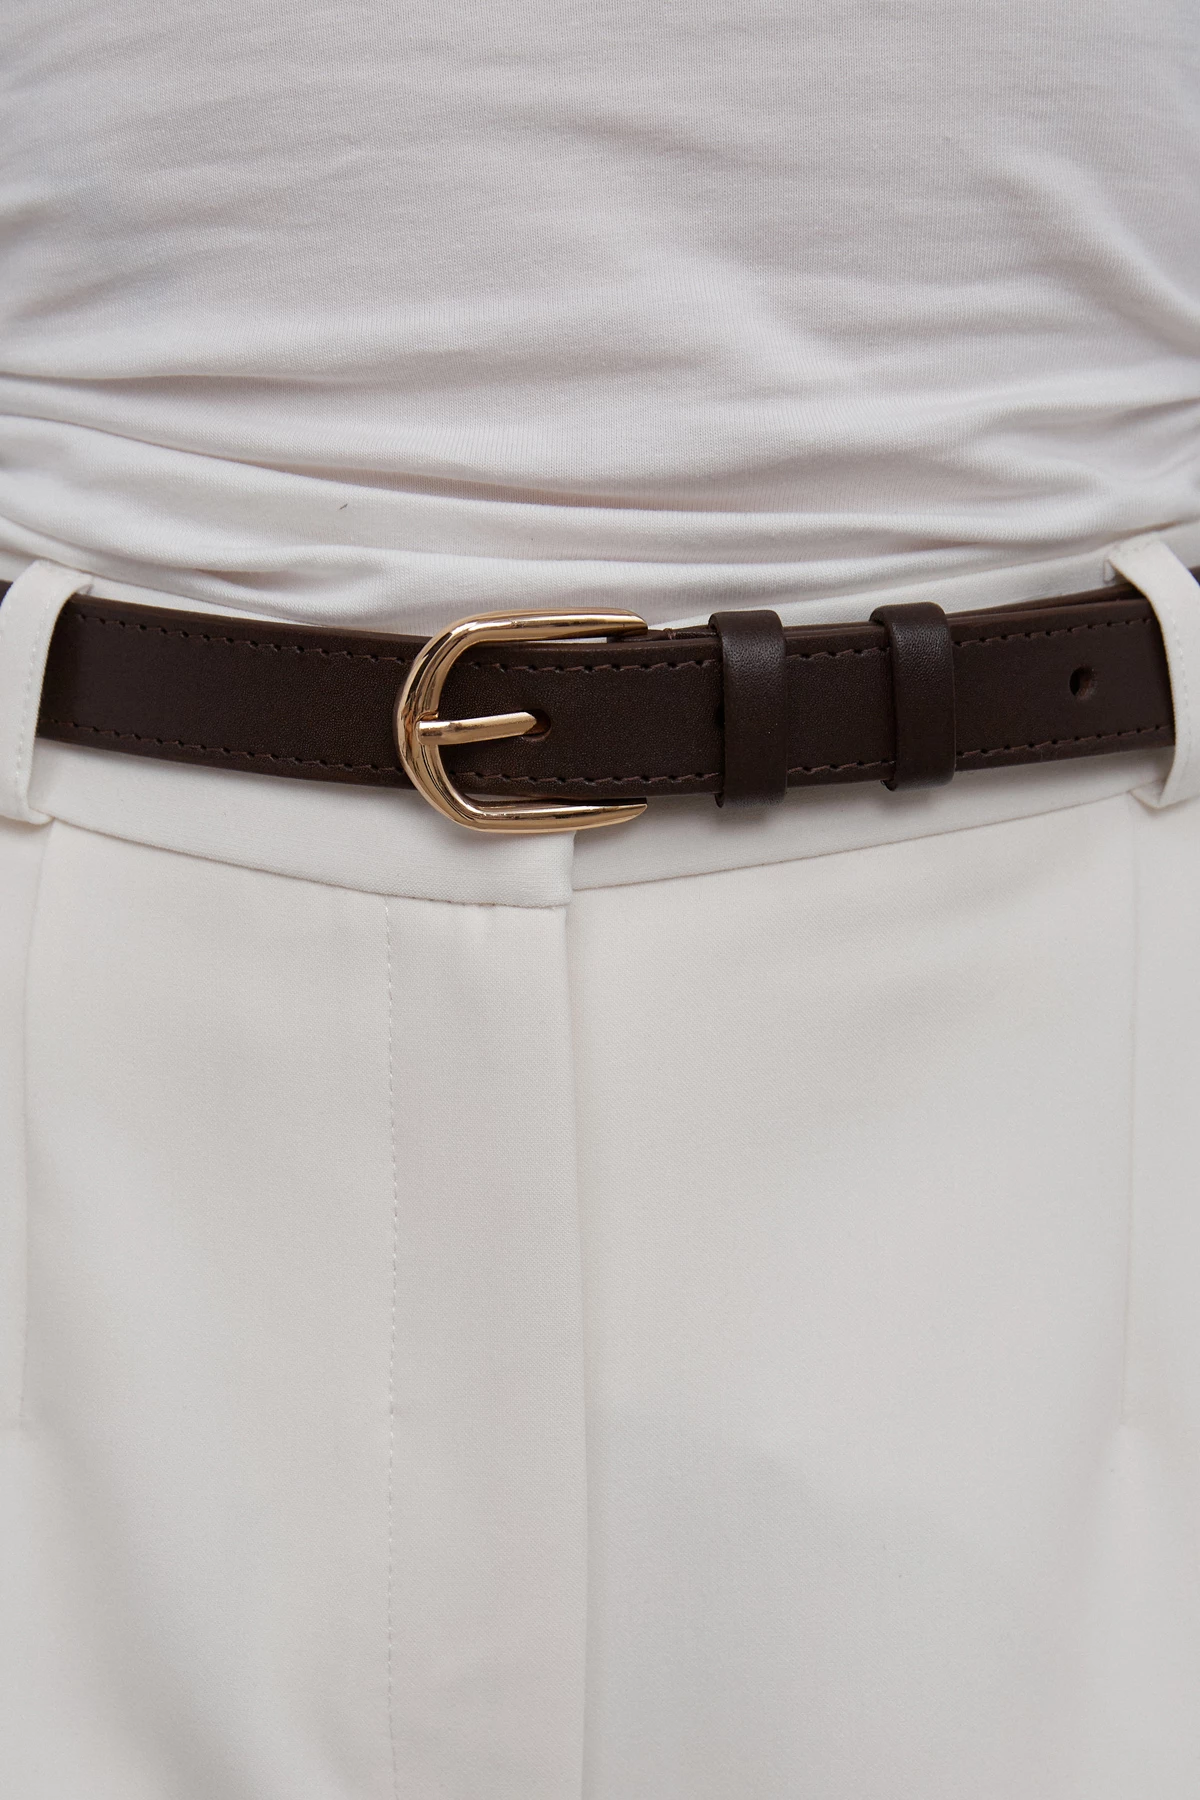 Brown leather belt with gold buckle, photo 1